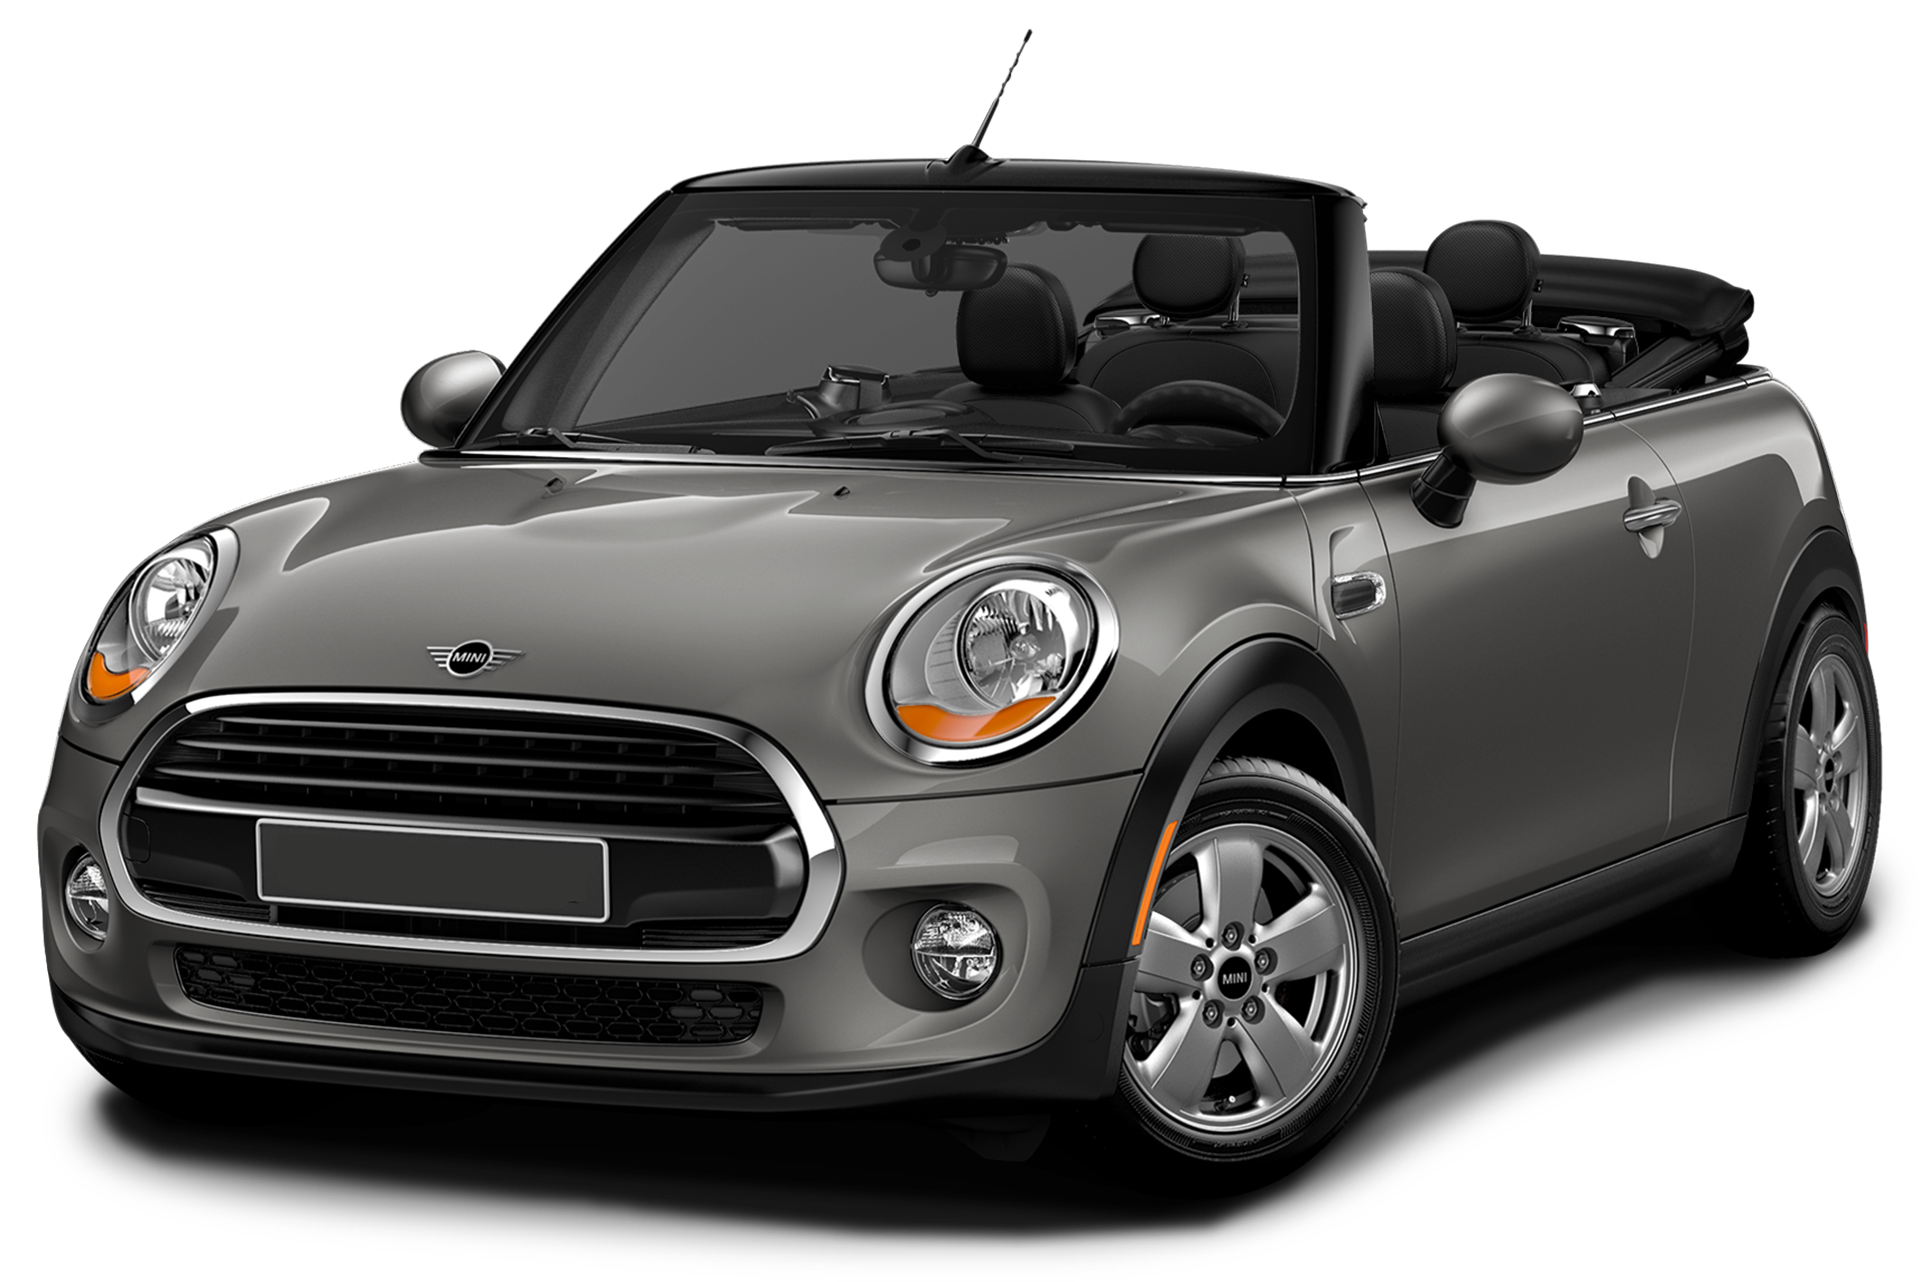 2019-mini-convertible-incentives-specials-offers-in-fort-lauderdale-fl